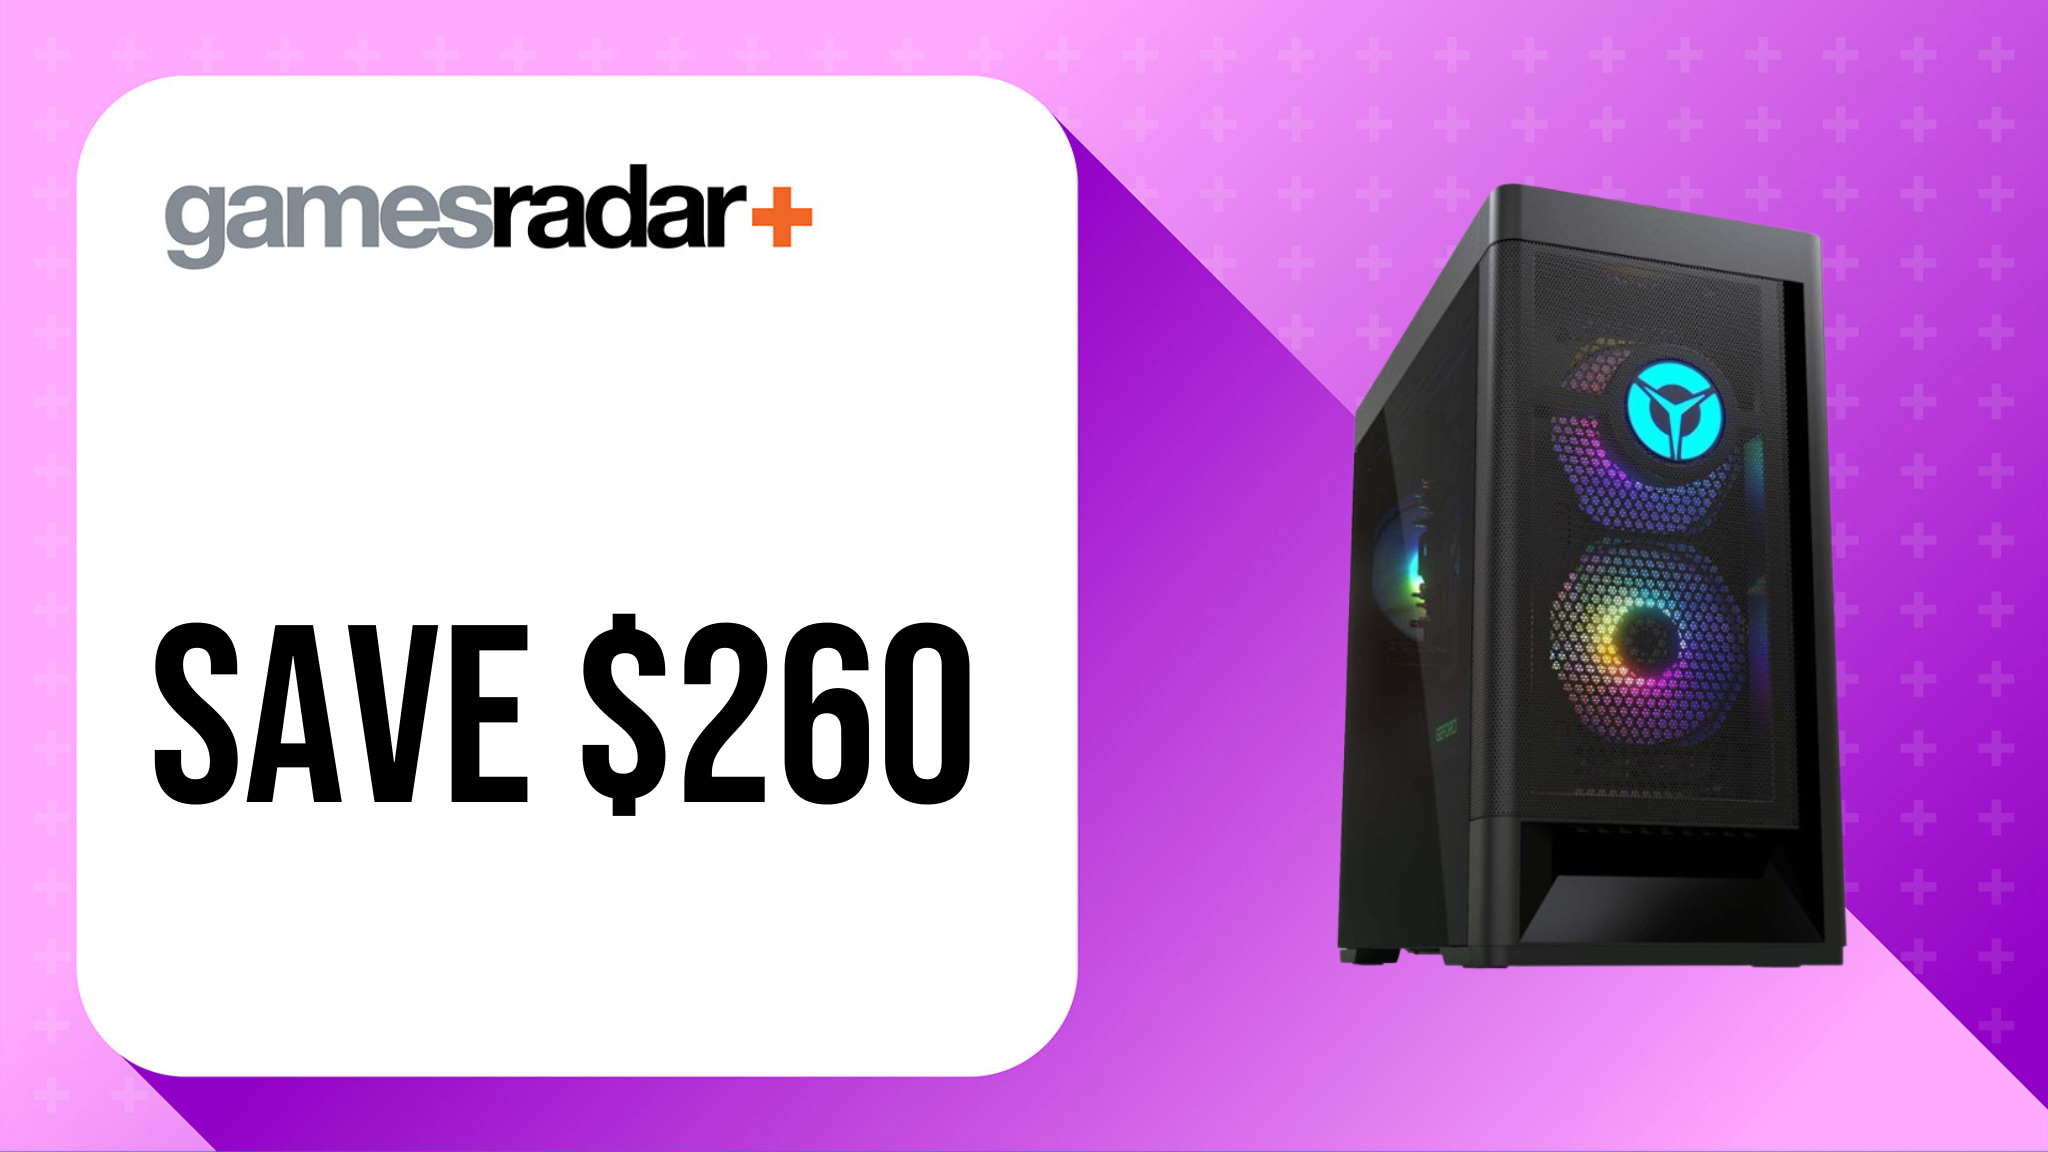 Lenovo Legion Tower 5 deal image with $260 saving stamp